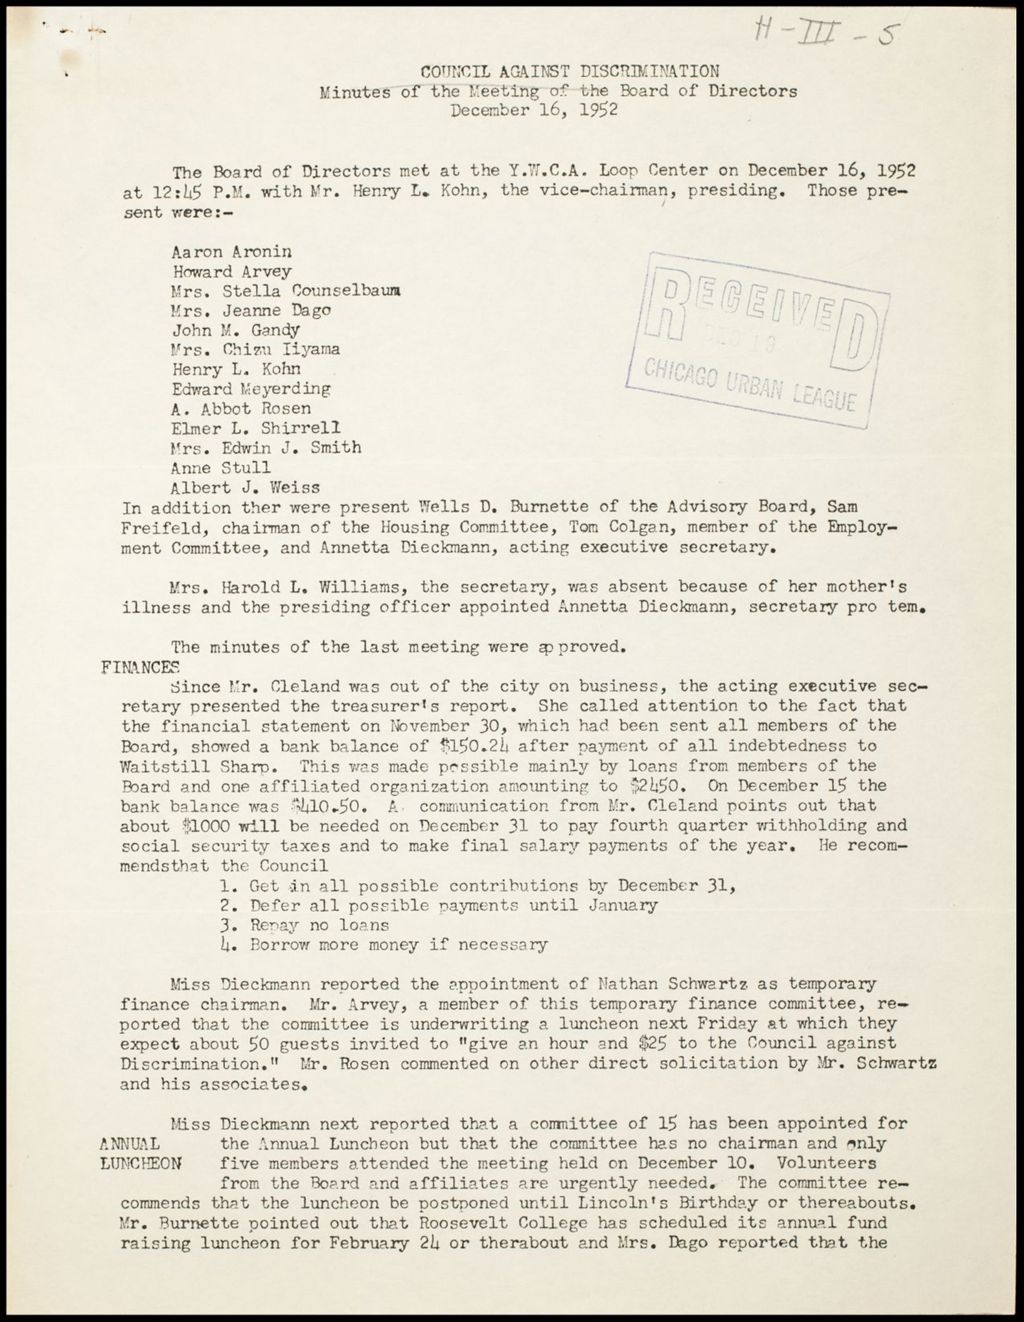 Miniature of Human Relations Department - Chicago Council Against Racial and Religious Discrimination, 1952-1954 (Folder I-2632)